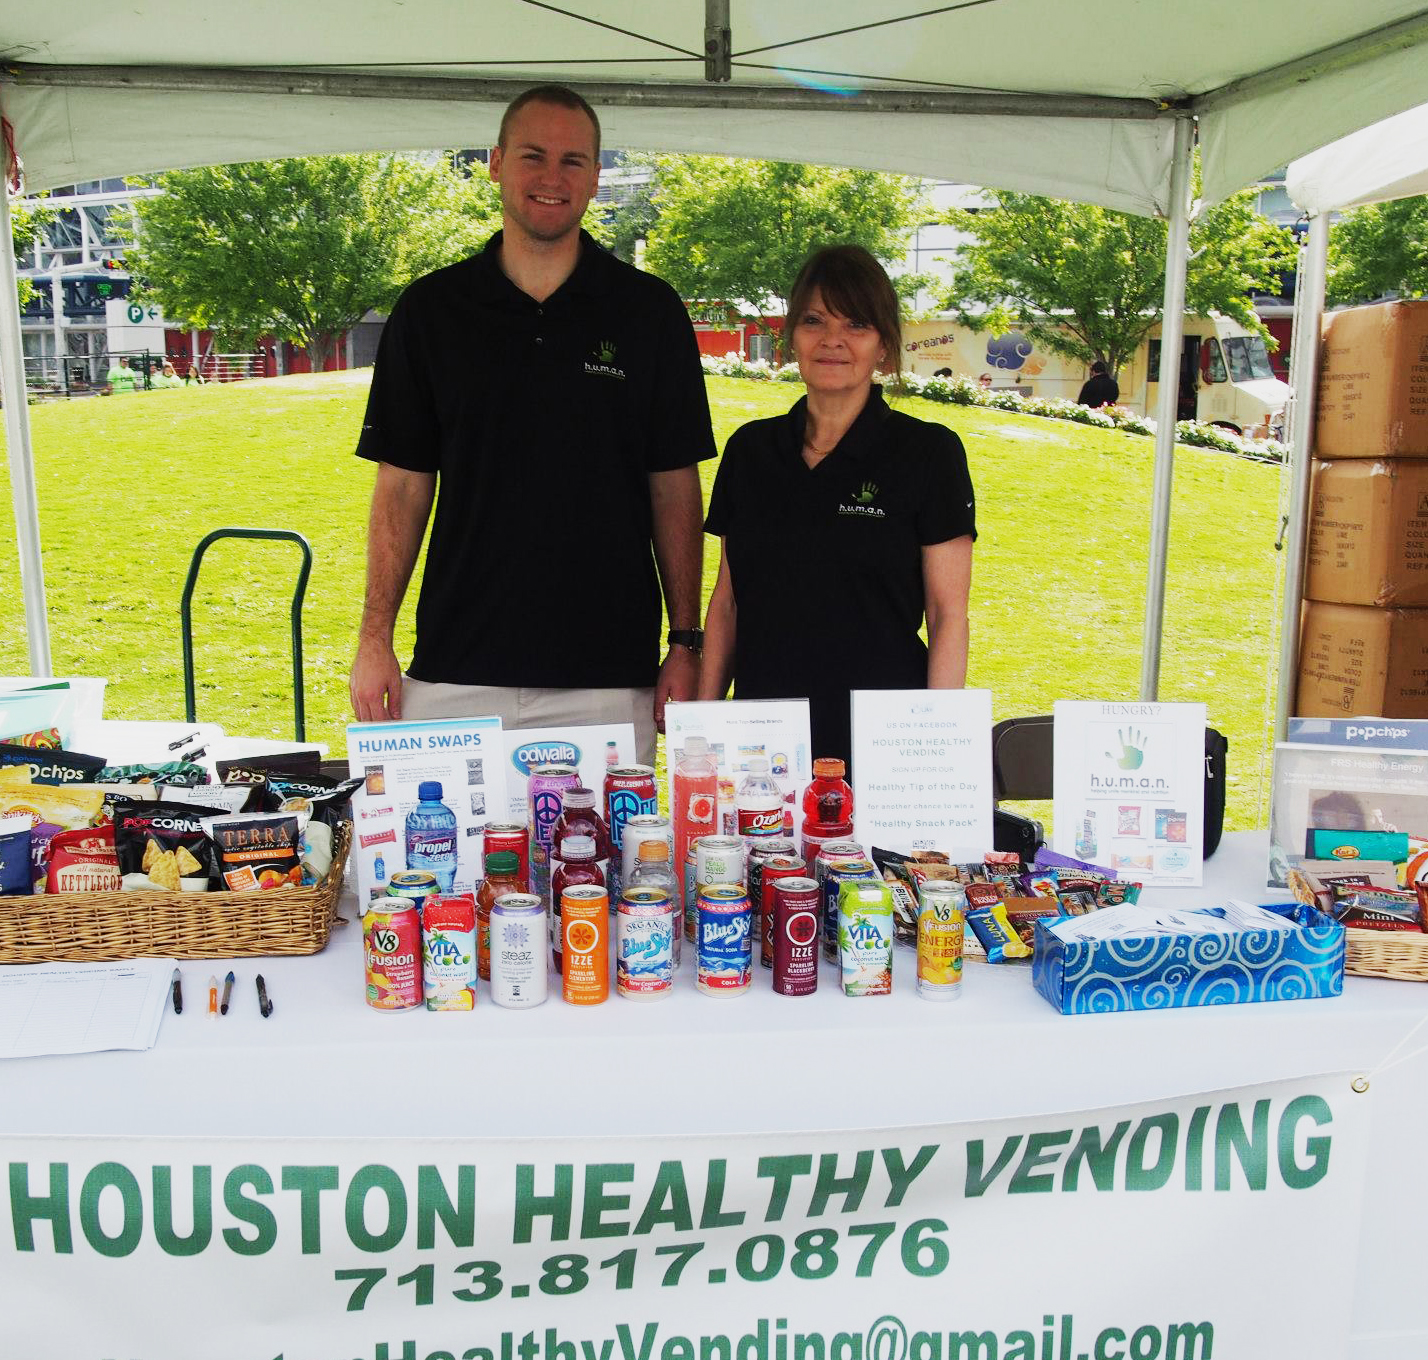 Shelley Levine & Corban Bates were one of four vendors approved by the Houston Independent School District for healthy vending